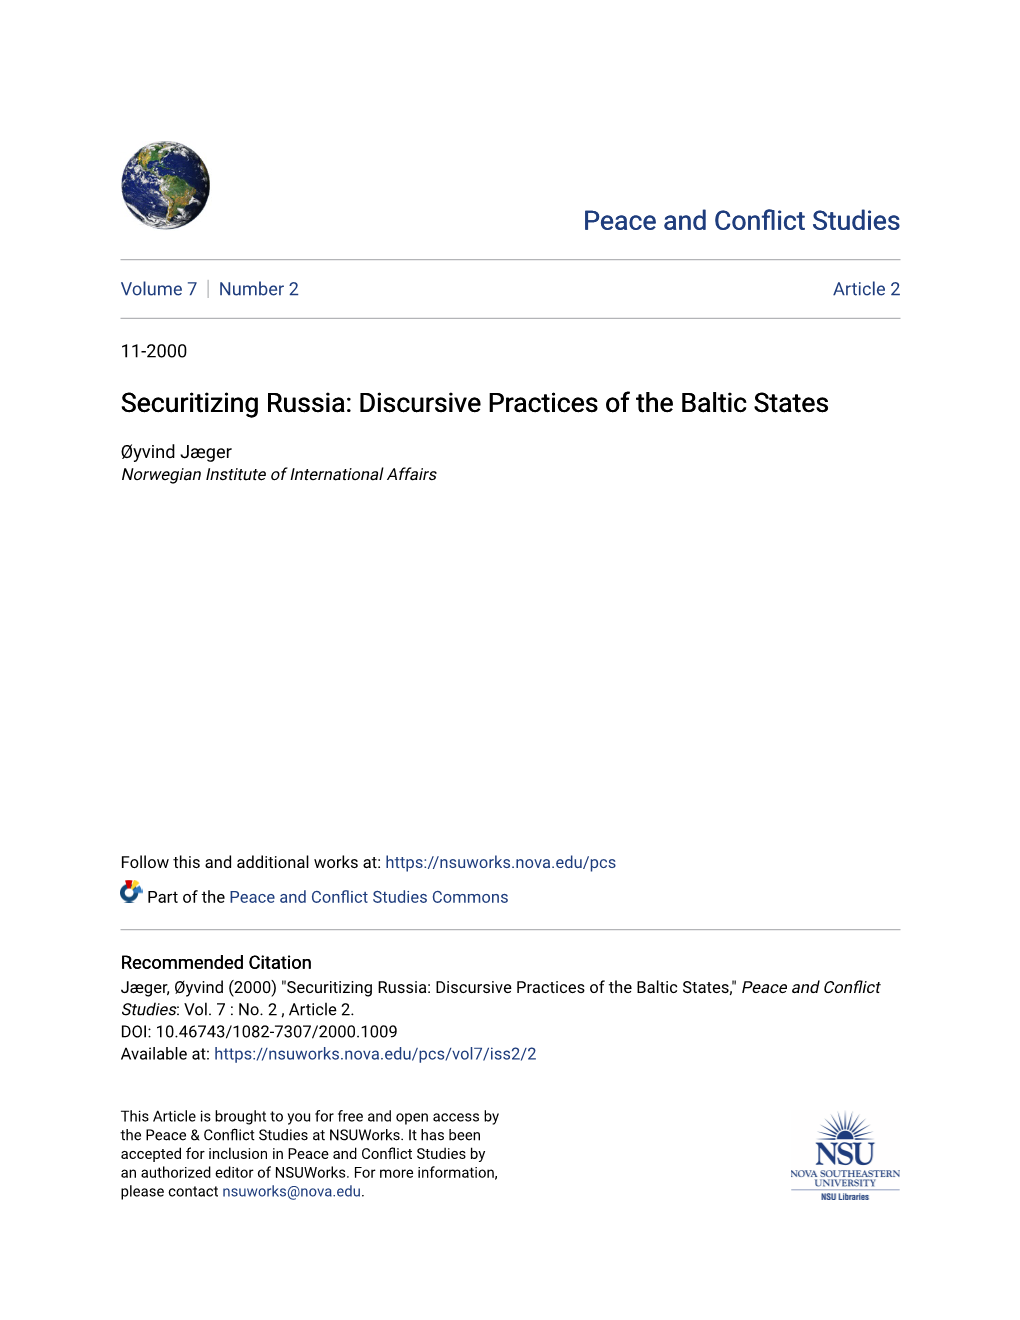 Discursive Practices of the Baltic States